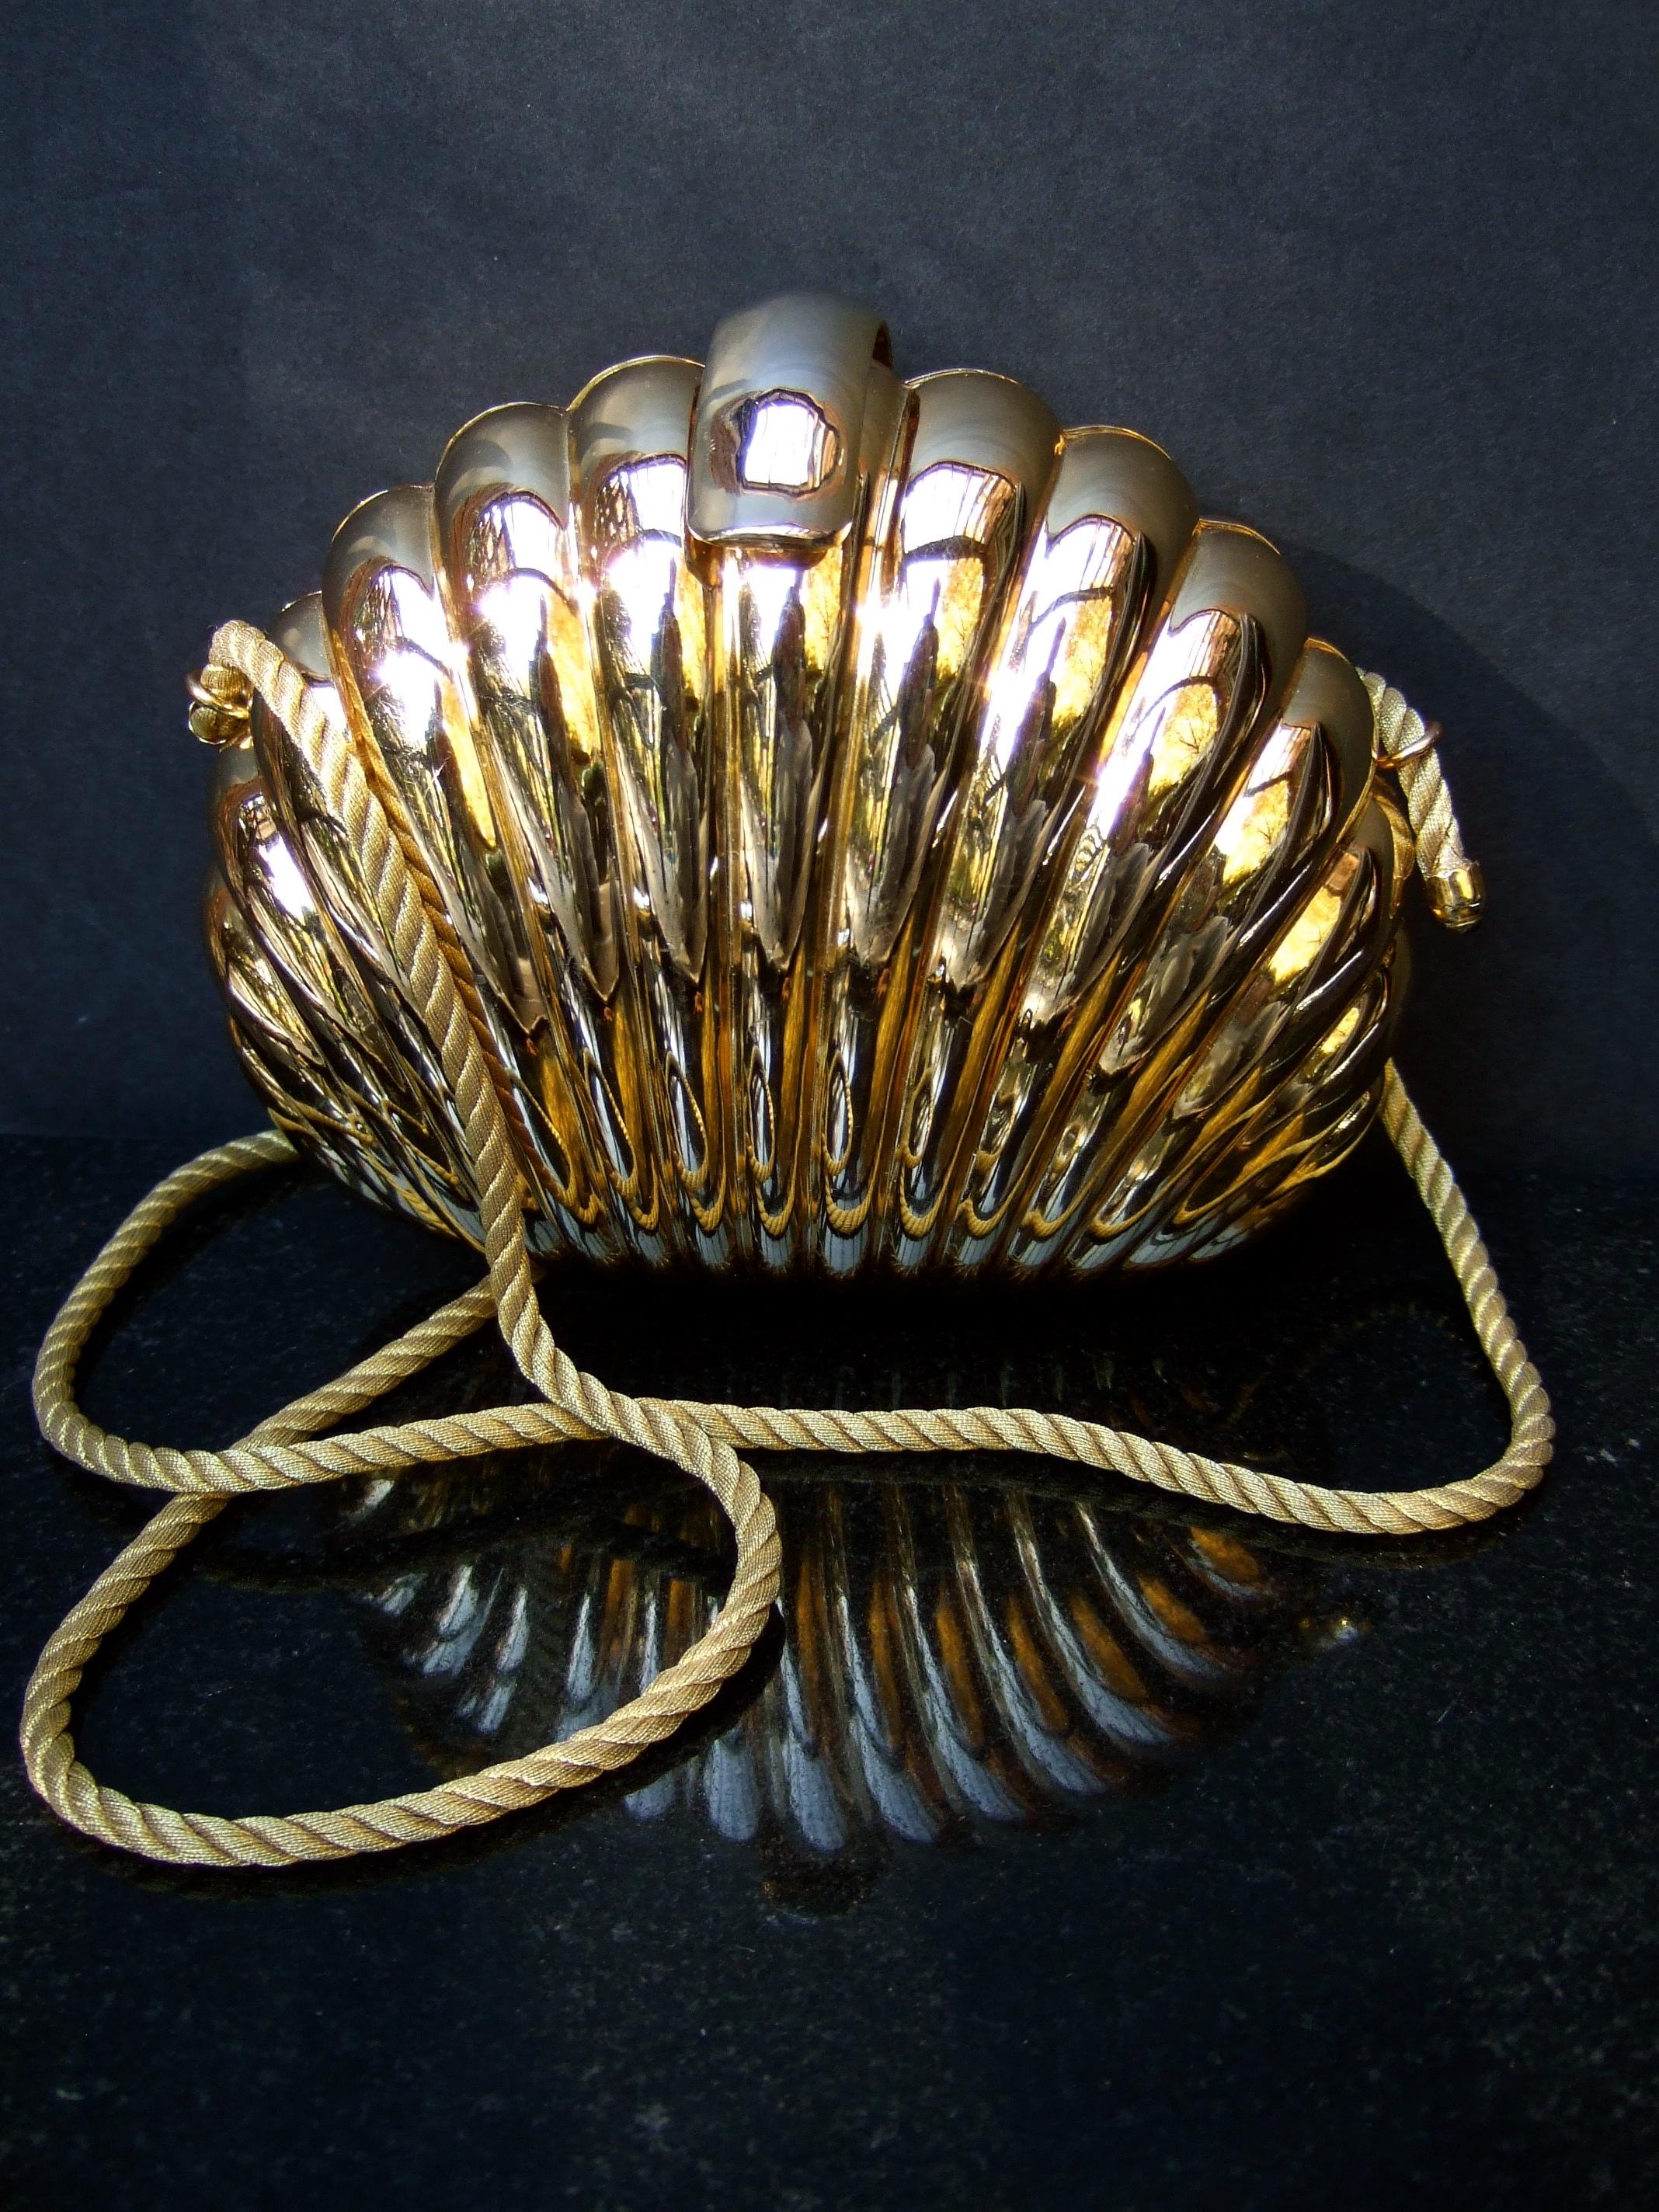 Saks Fifth Avenue Italian gilt metal minaudiere' evening bag c 1980
The elegant grooved gold metal shoulder bag has a clam shell 
structured design

Paired with a golden braided rope shoulder strap that is stationary
 on the exterior.  The interior